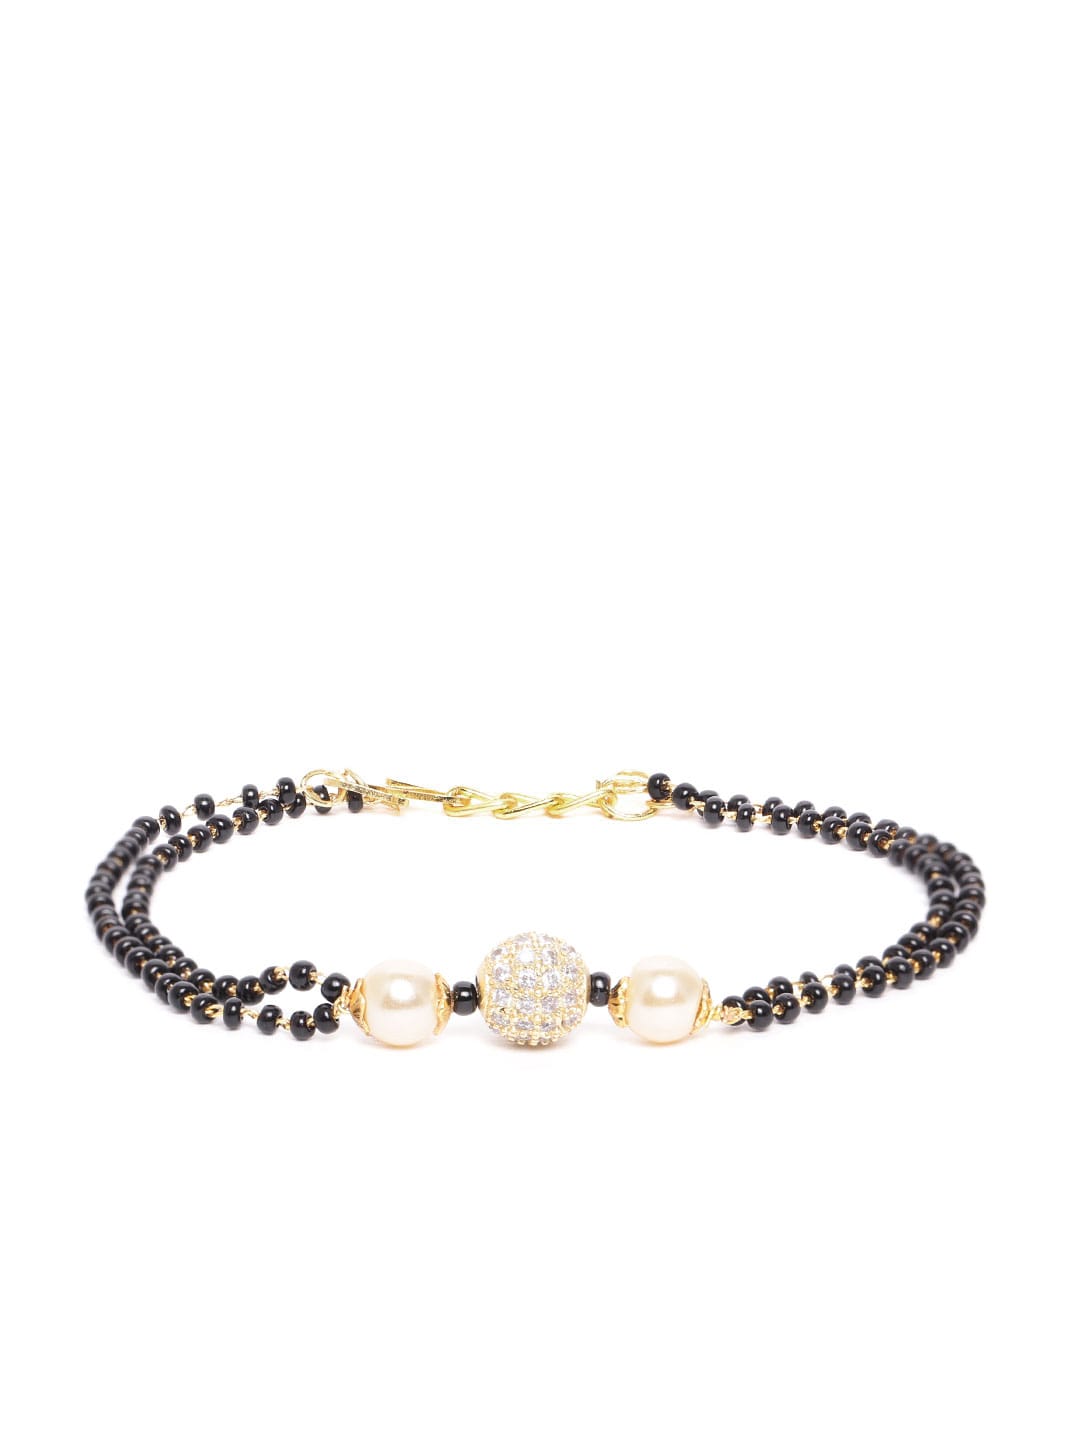 JEWELS GEHNA Black & Off-White Gold-Plated AD-Studded & Beaded Mangalsutra Bracelet Price in India